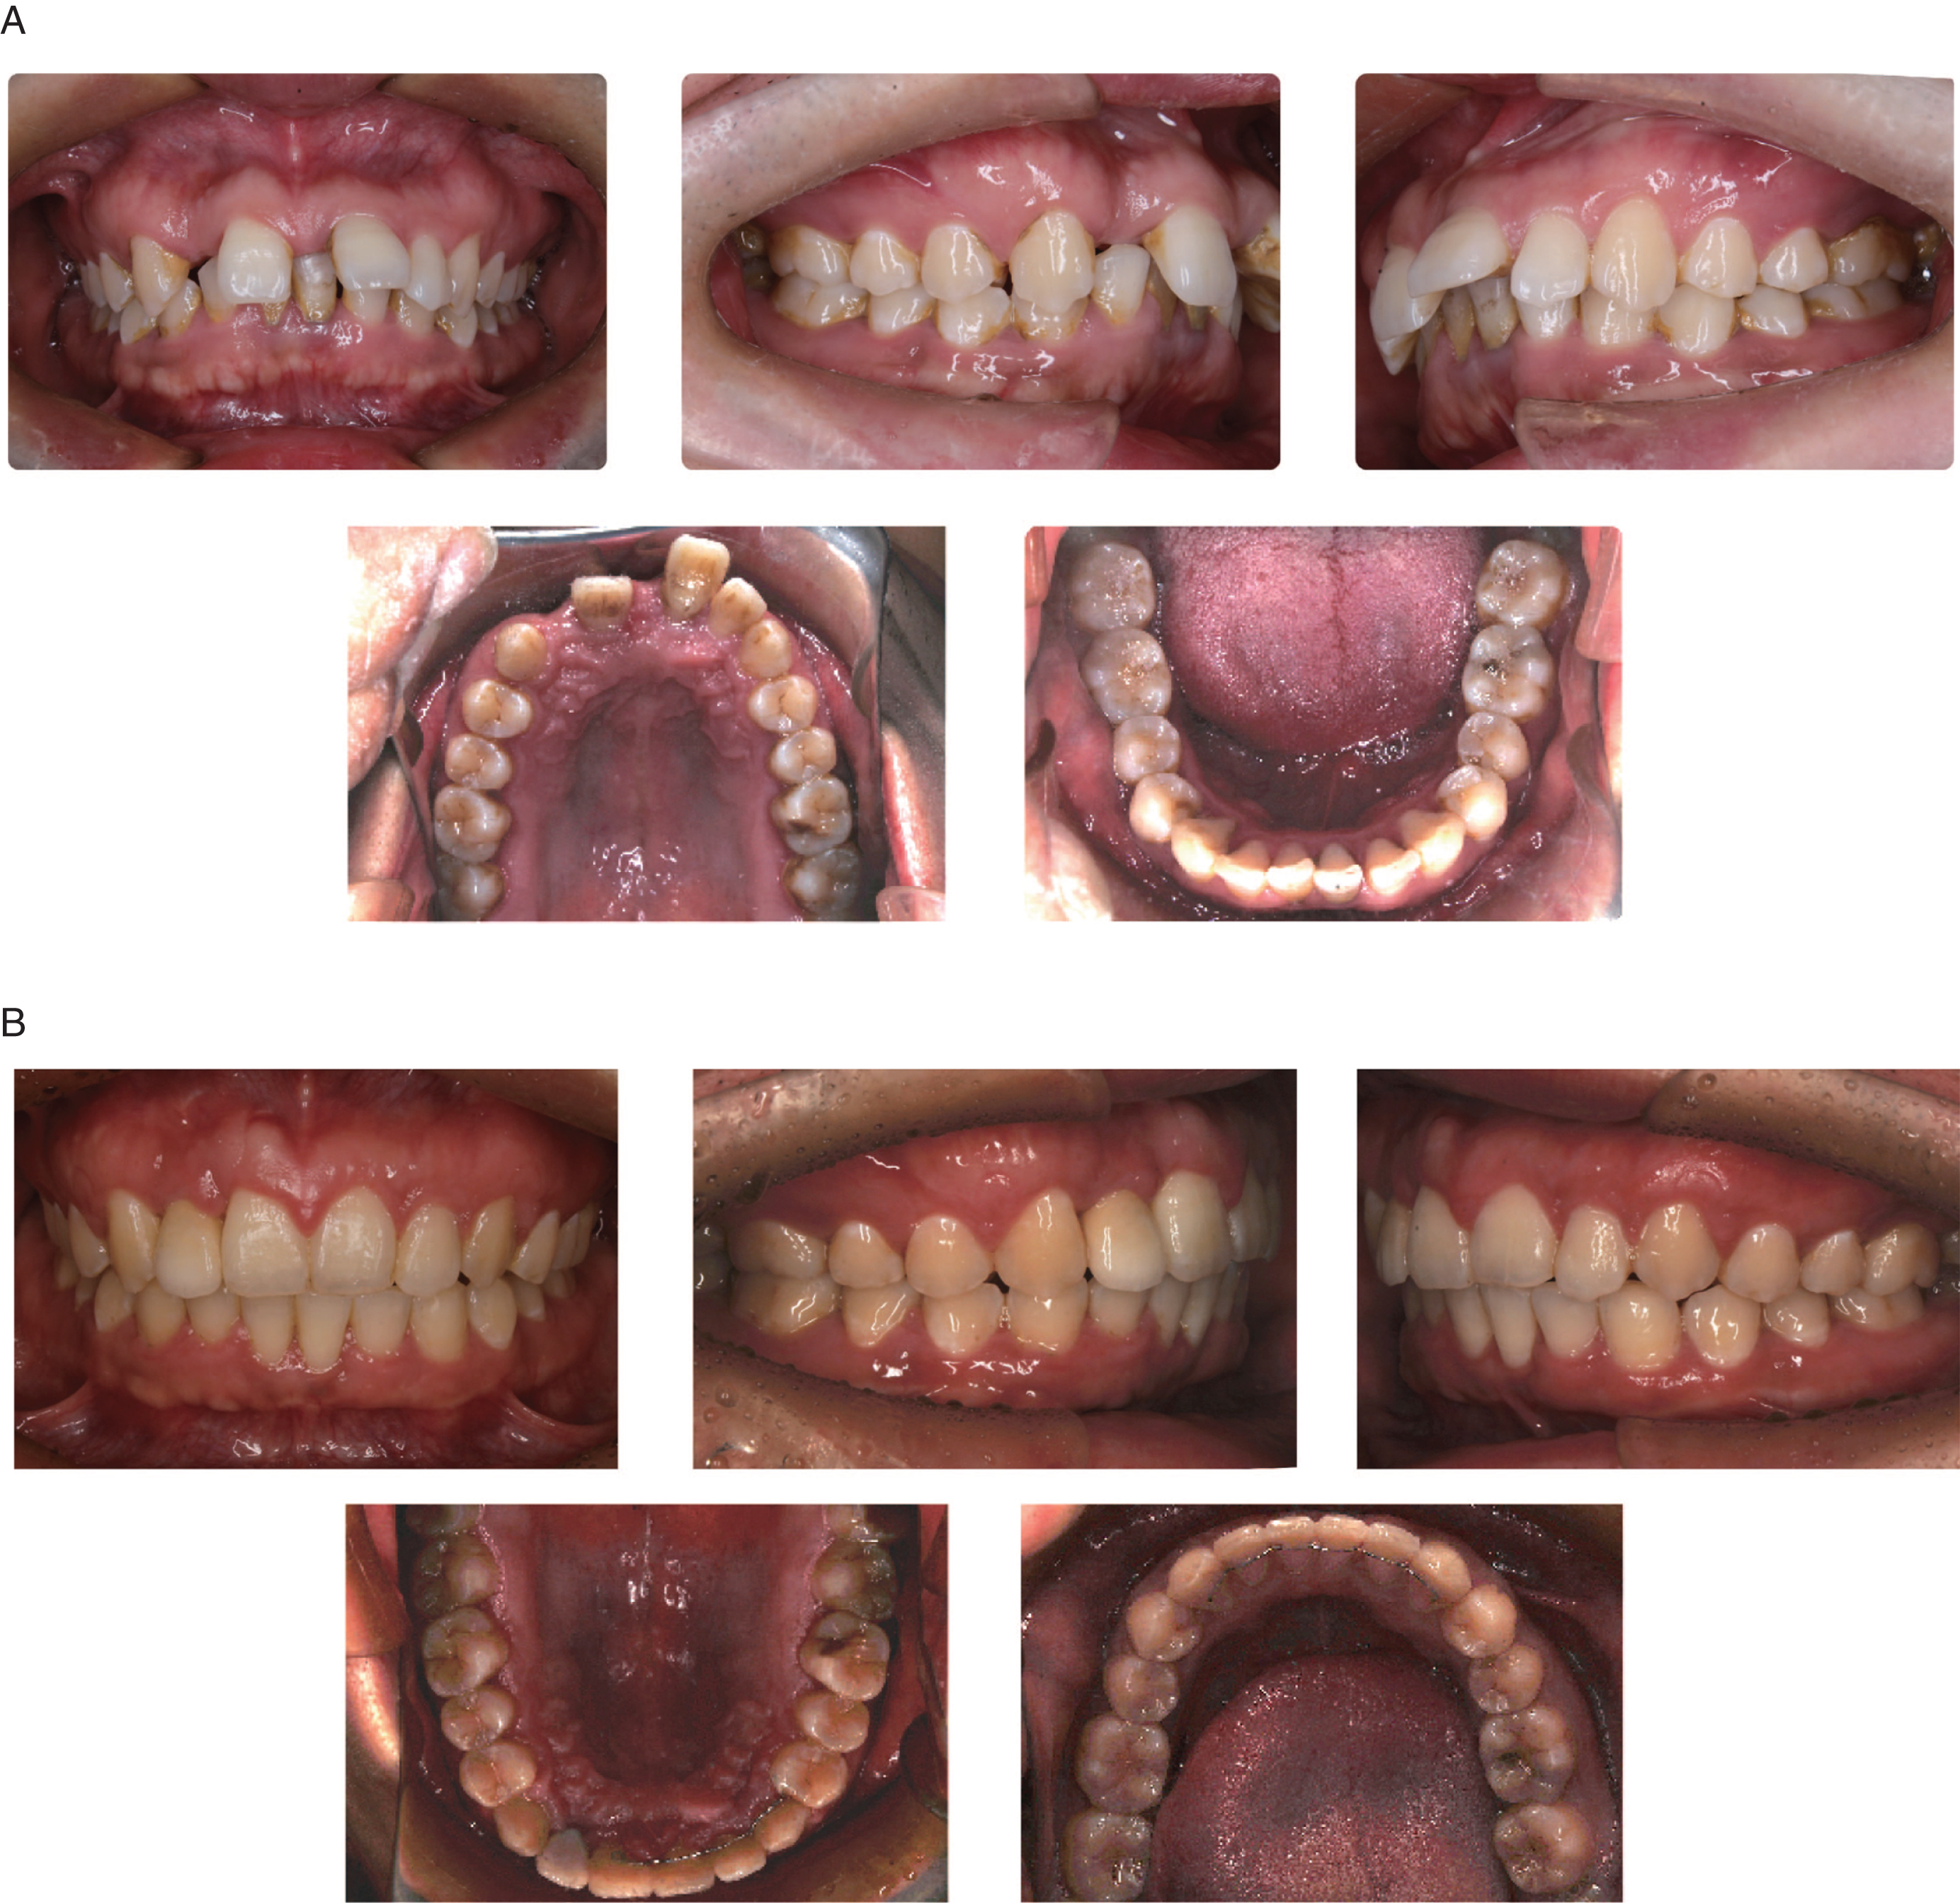 Comparision of intraoral potographs of pre- and post-treatment. A. Intraoral photographs of pre-treatment; B. Intraoral photographs of post-treatment.